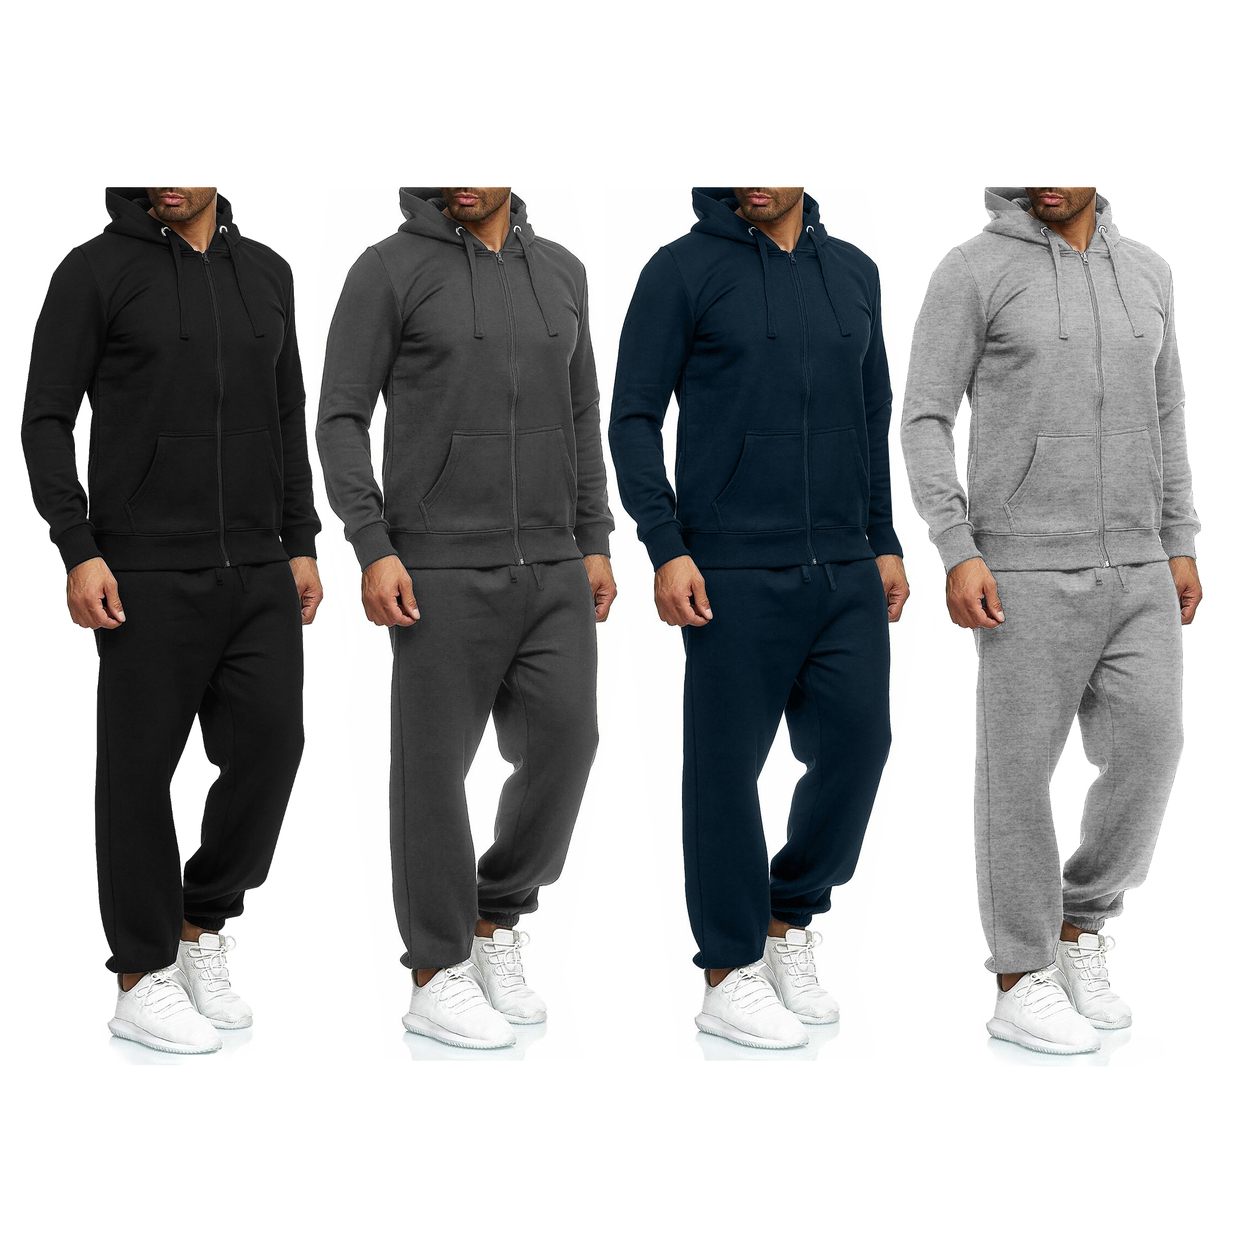 Multi-Pack: Men's Casual Big & Tall Athletic Active Winter Warm Fleece Lined Full Zip Tracksuit Jogger Set - Charcoal, 1-pack, Large